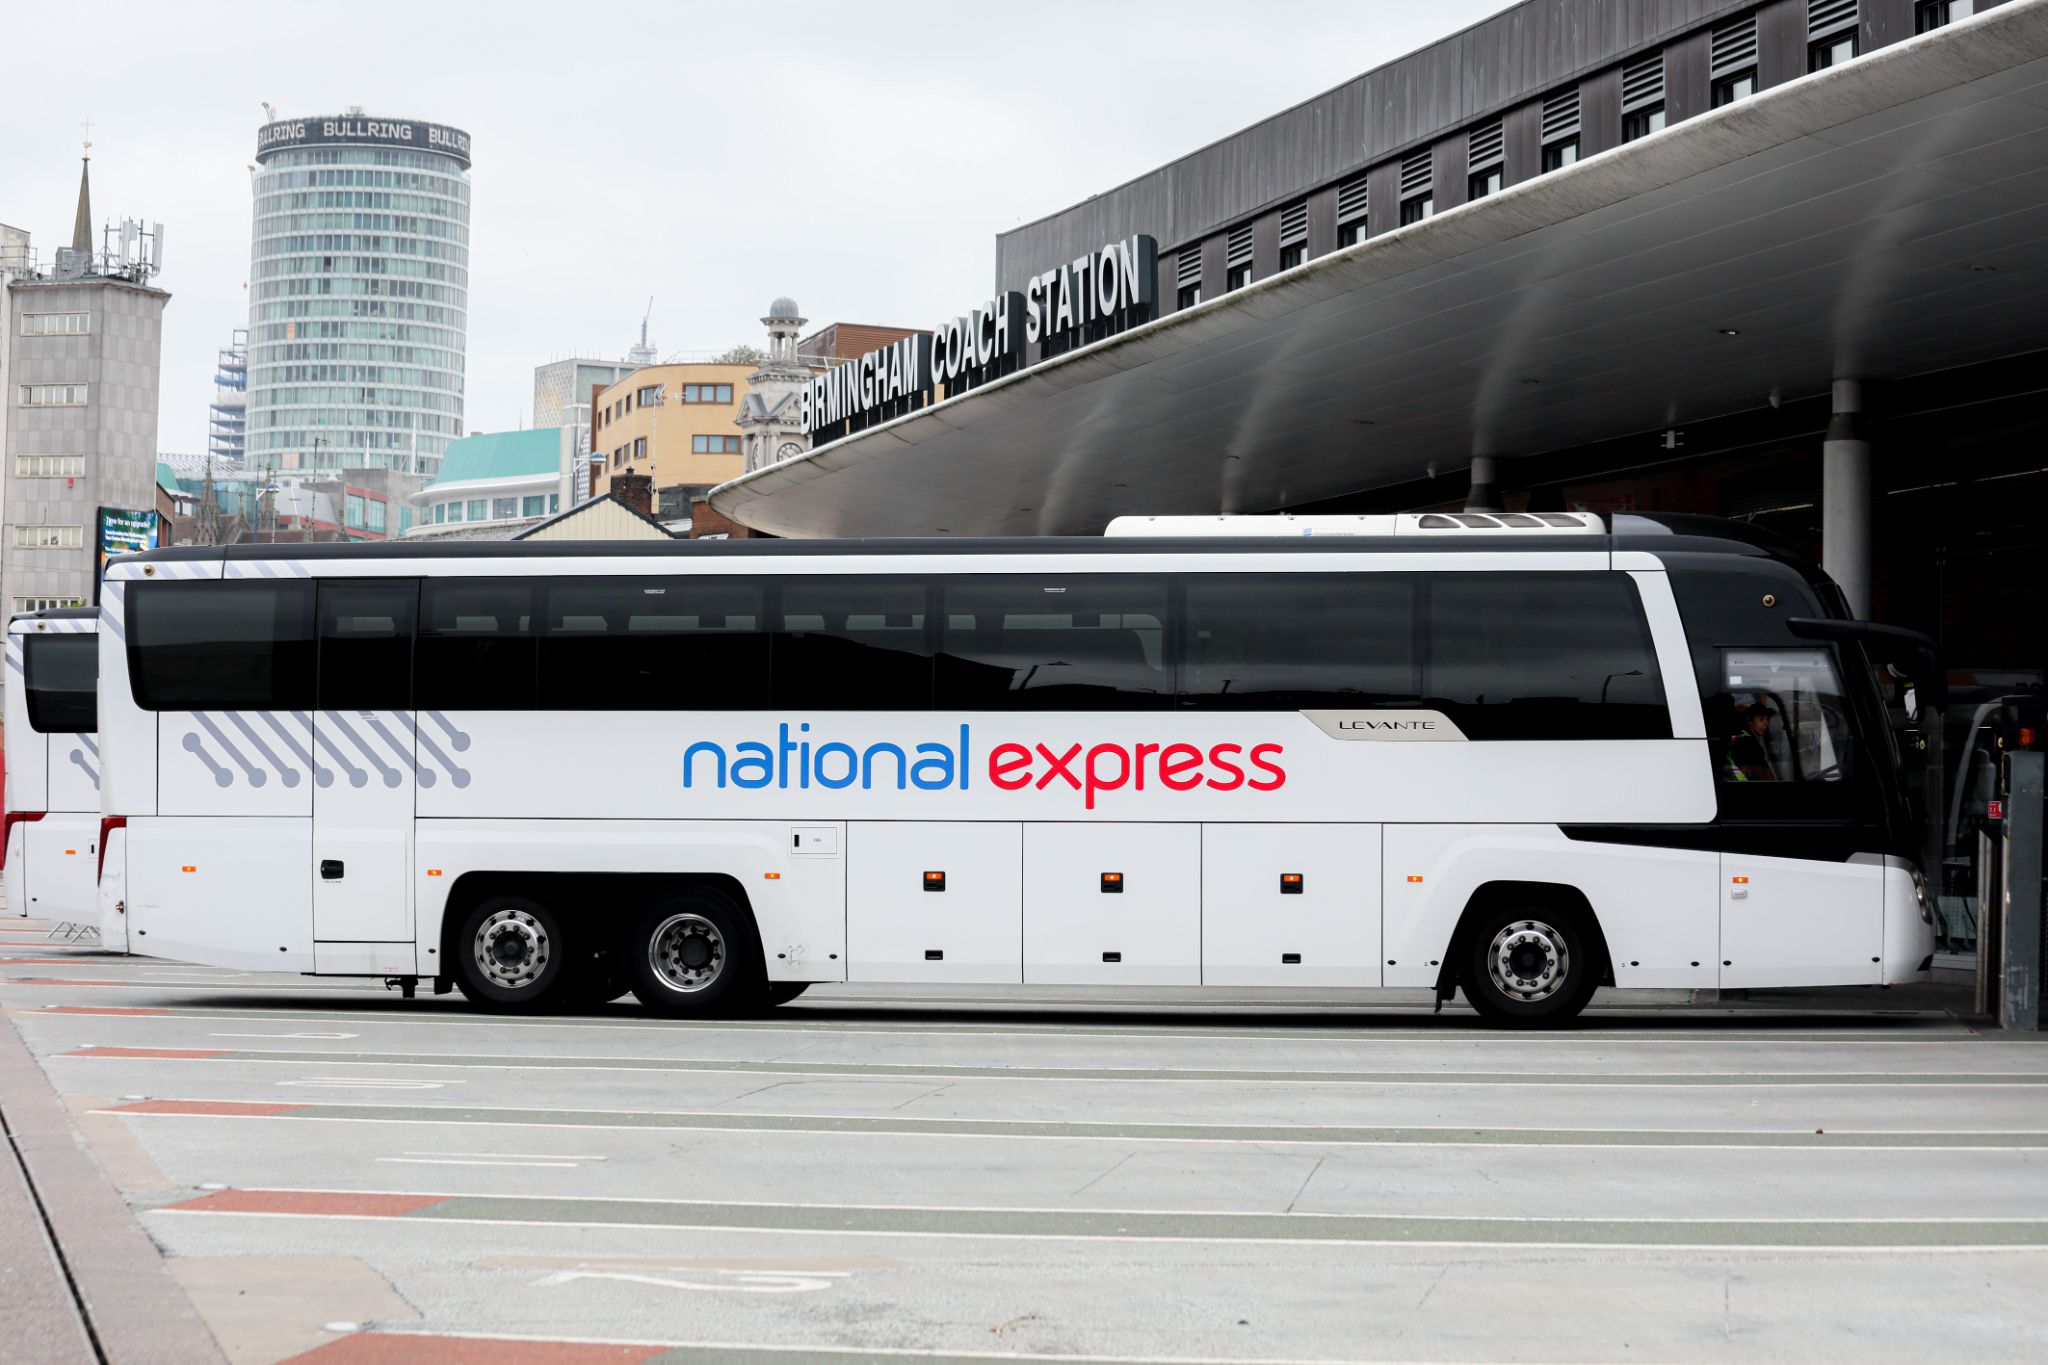 National Express announces significant network growth